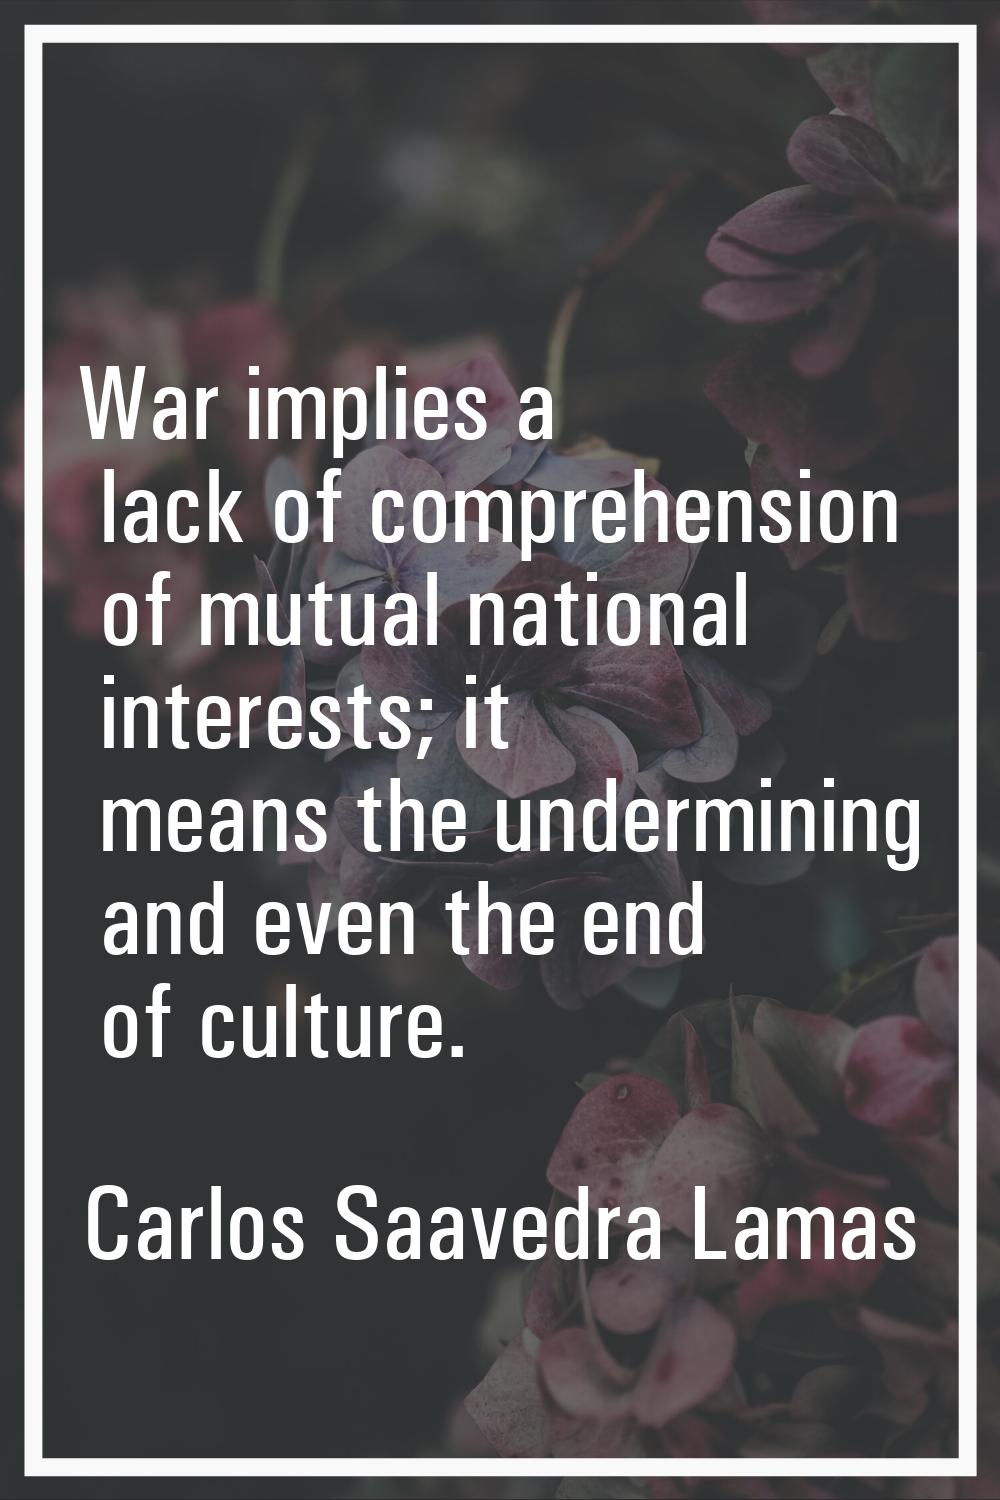 War implies a lack of comprehension of mutual national interests; it means the undermining and even